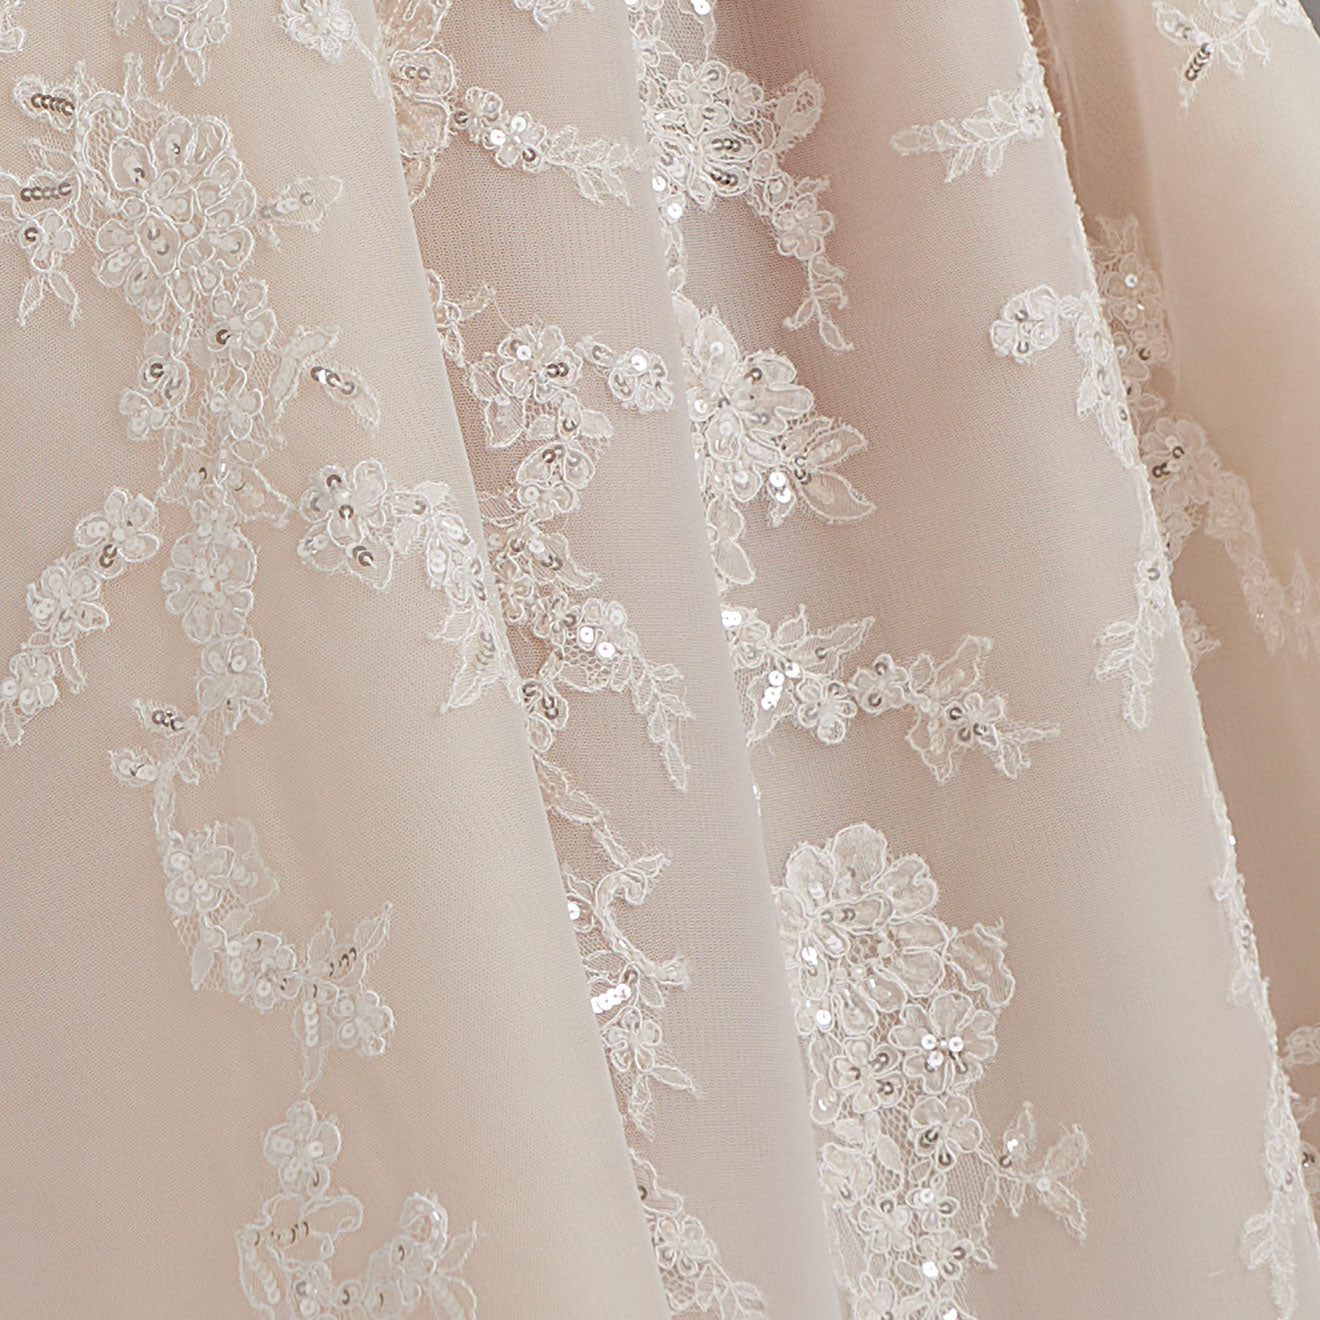 Fully embroidered box-pleated wedding dress with intricate lace (Sale)